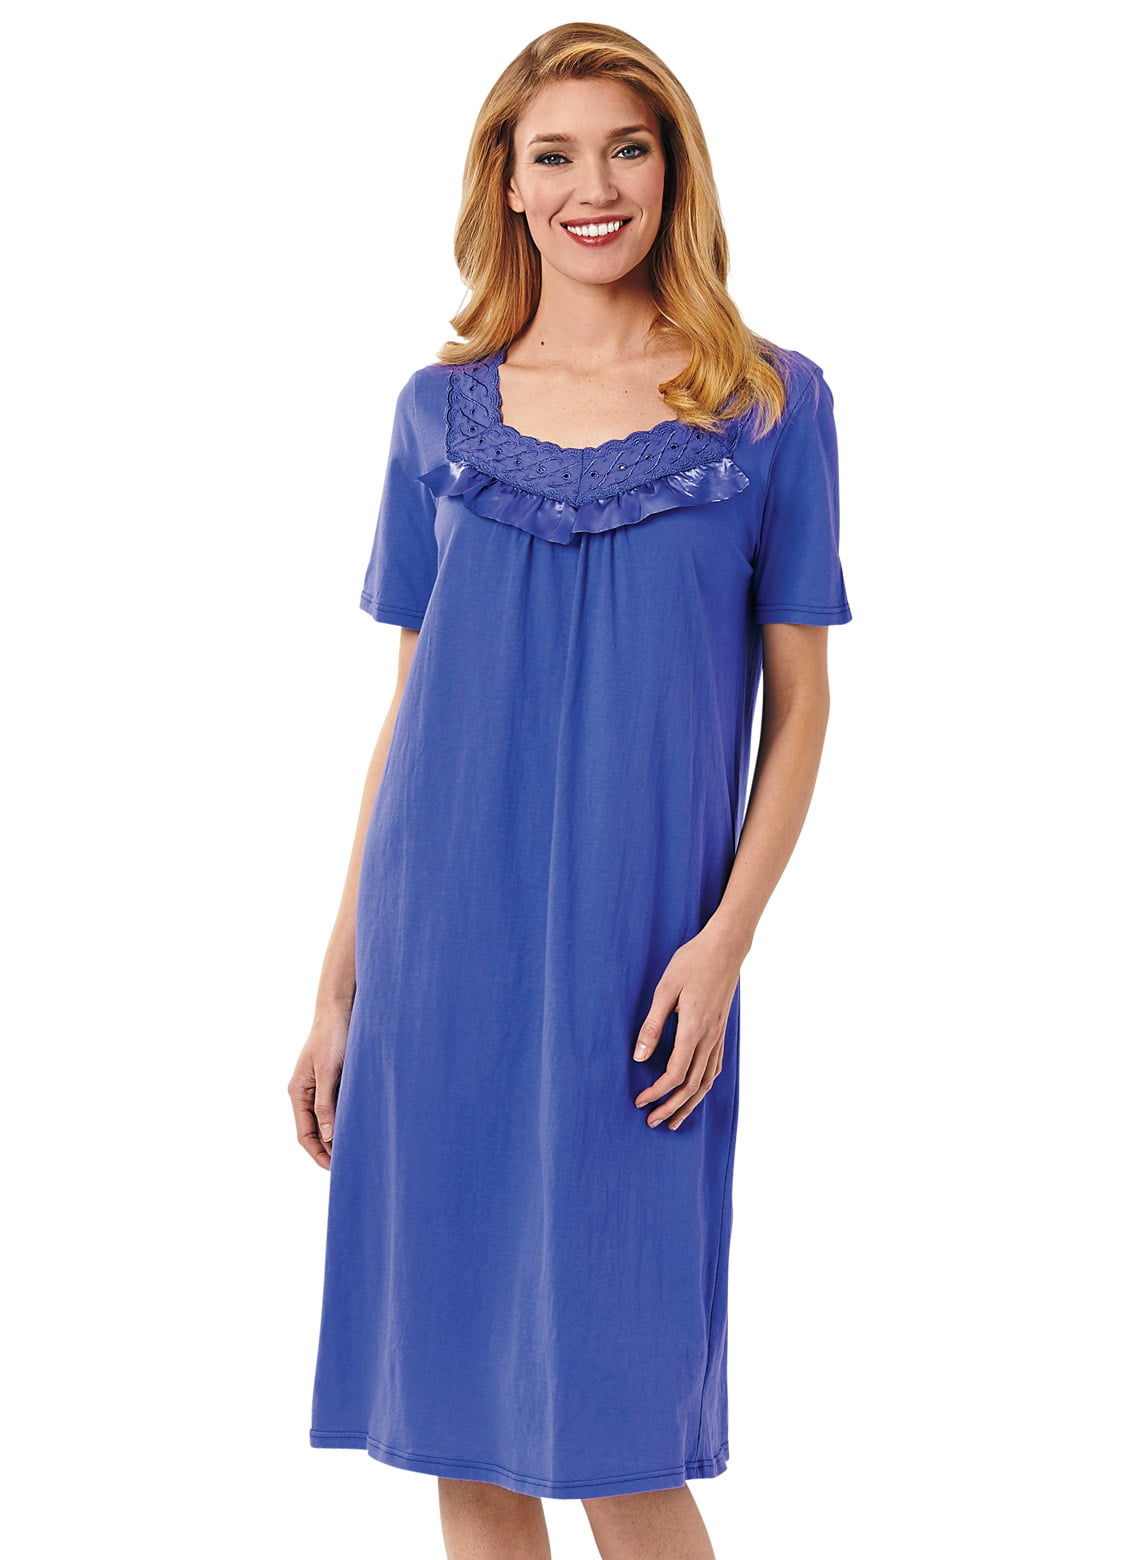 Cotton Knit Nightgown By Cozee Corner 